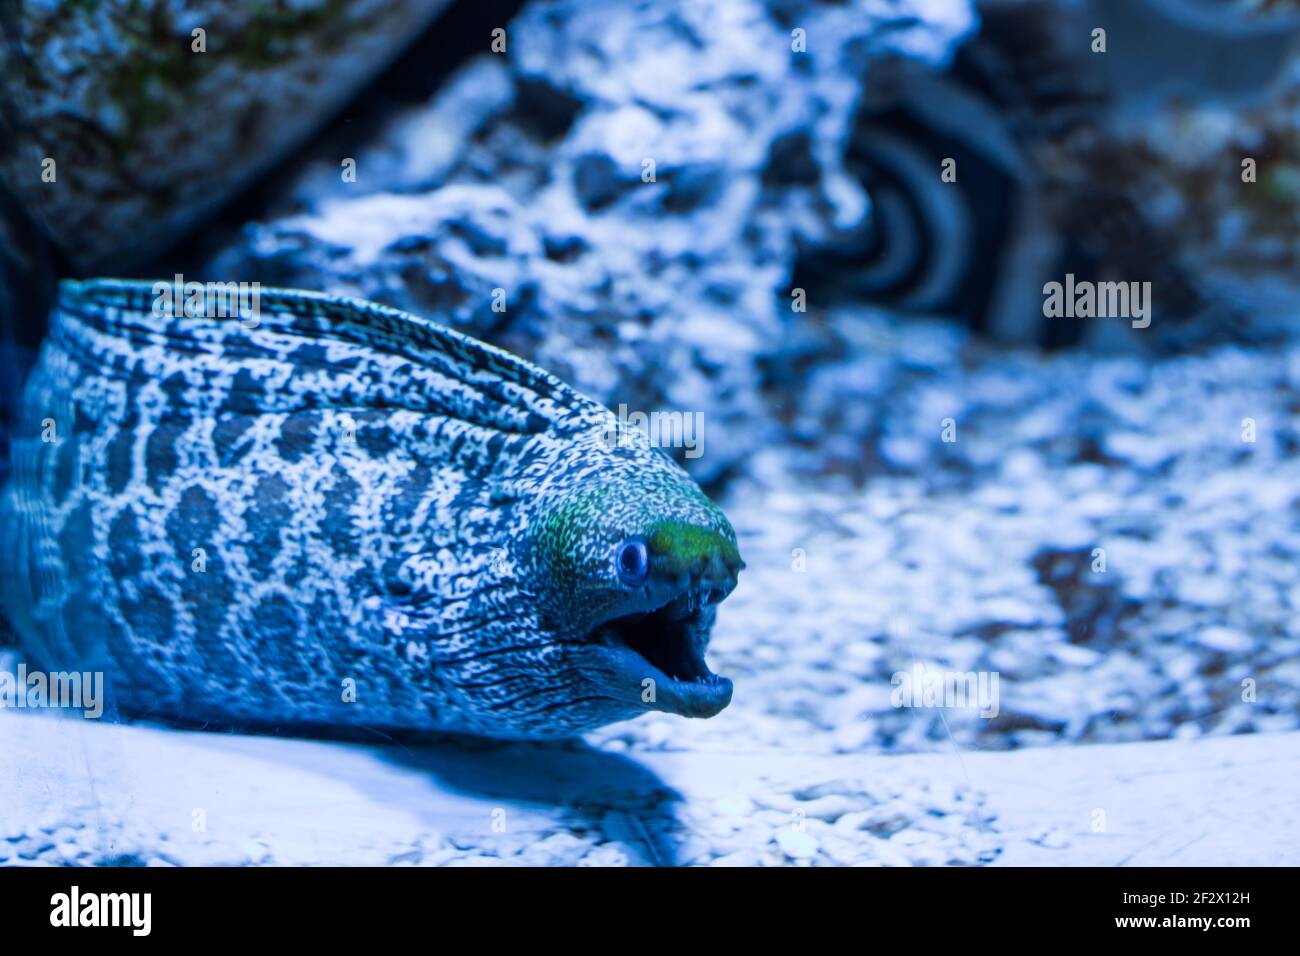 scary spotted moray eel fish in water extended its head, oceanic deep-sea fish Stock Photo